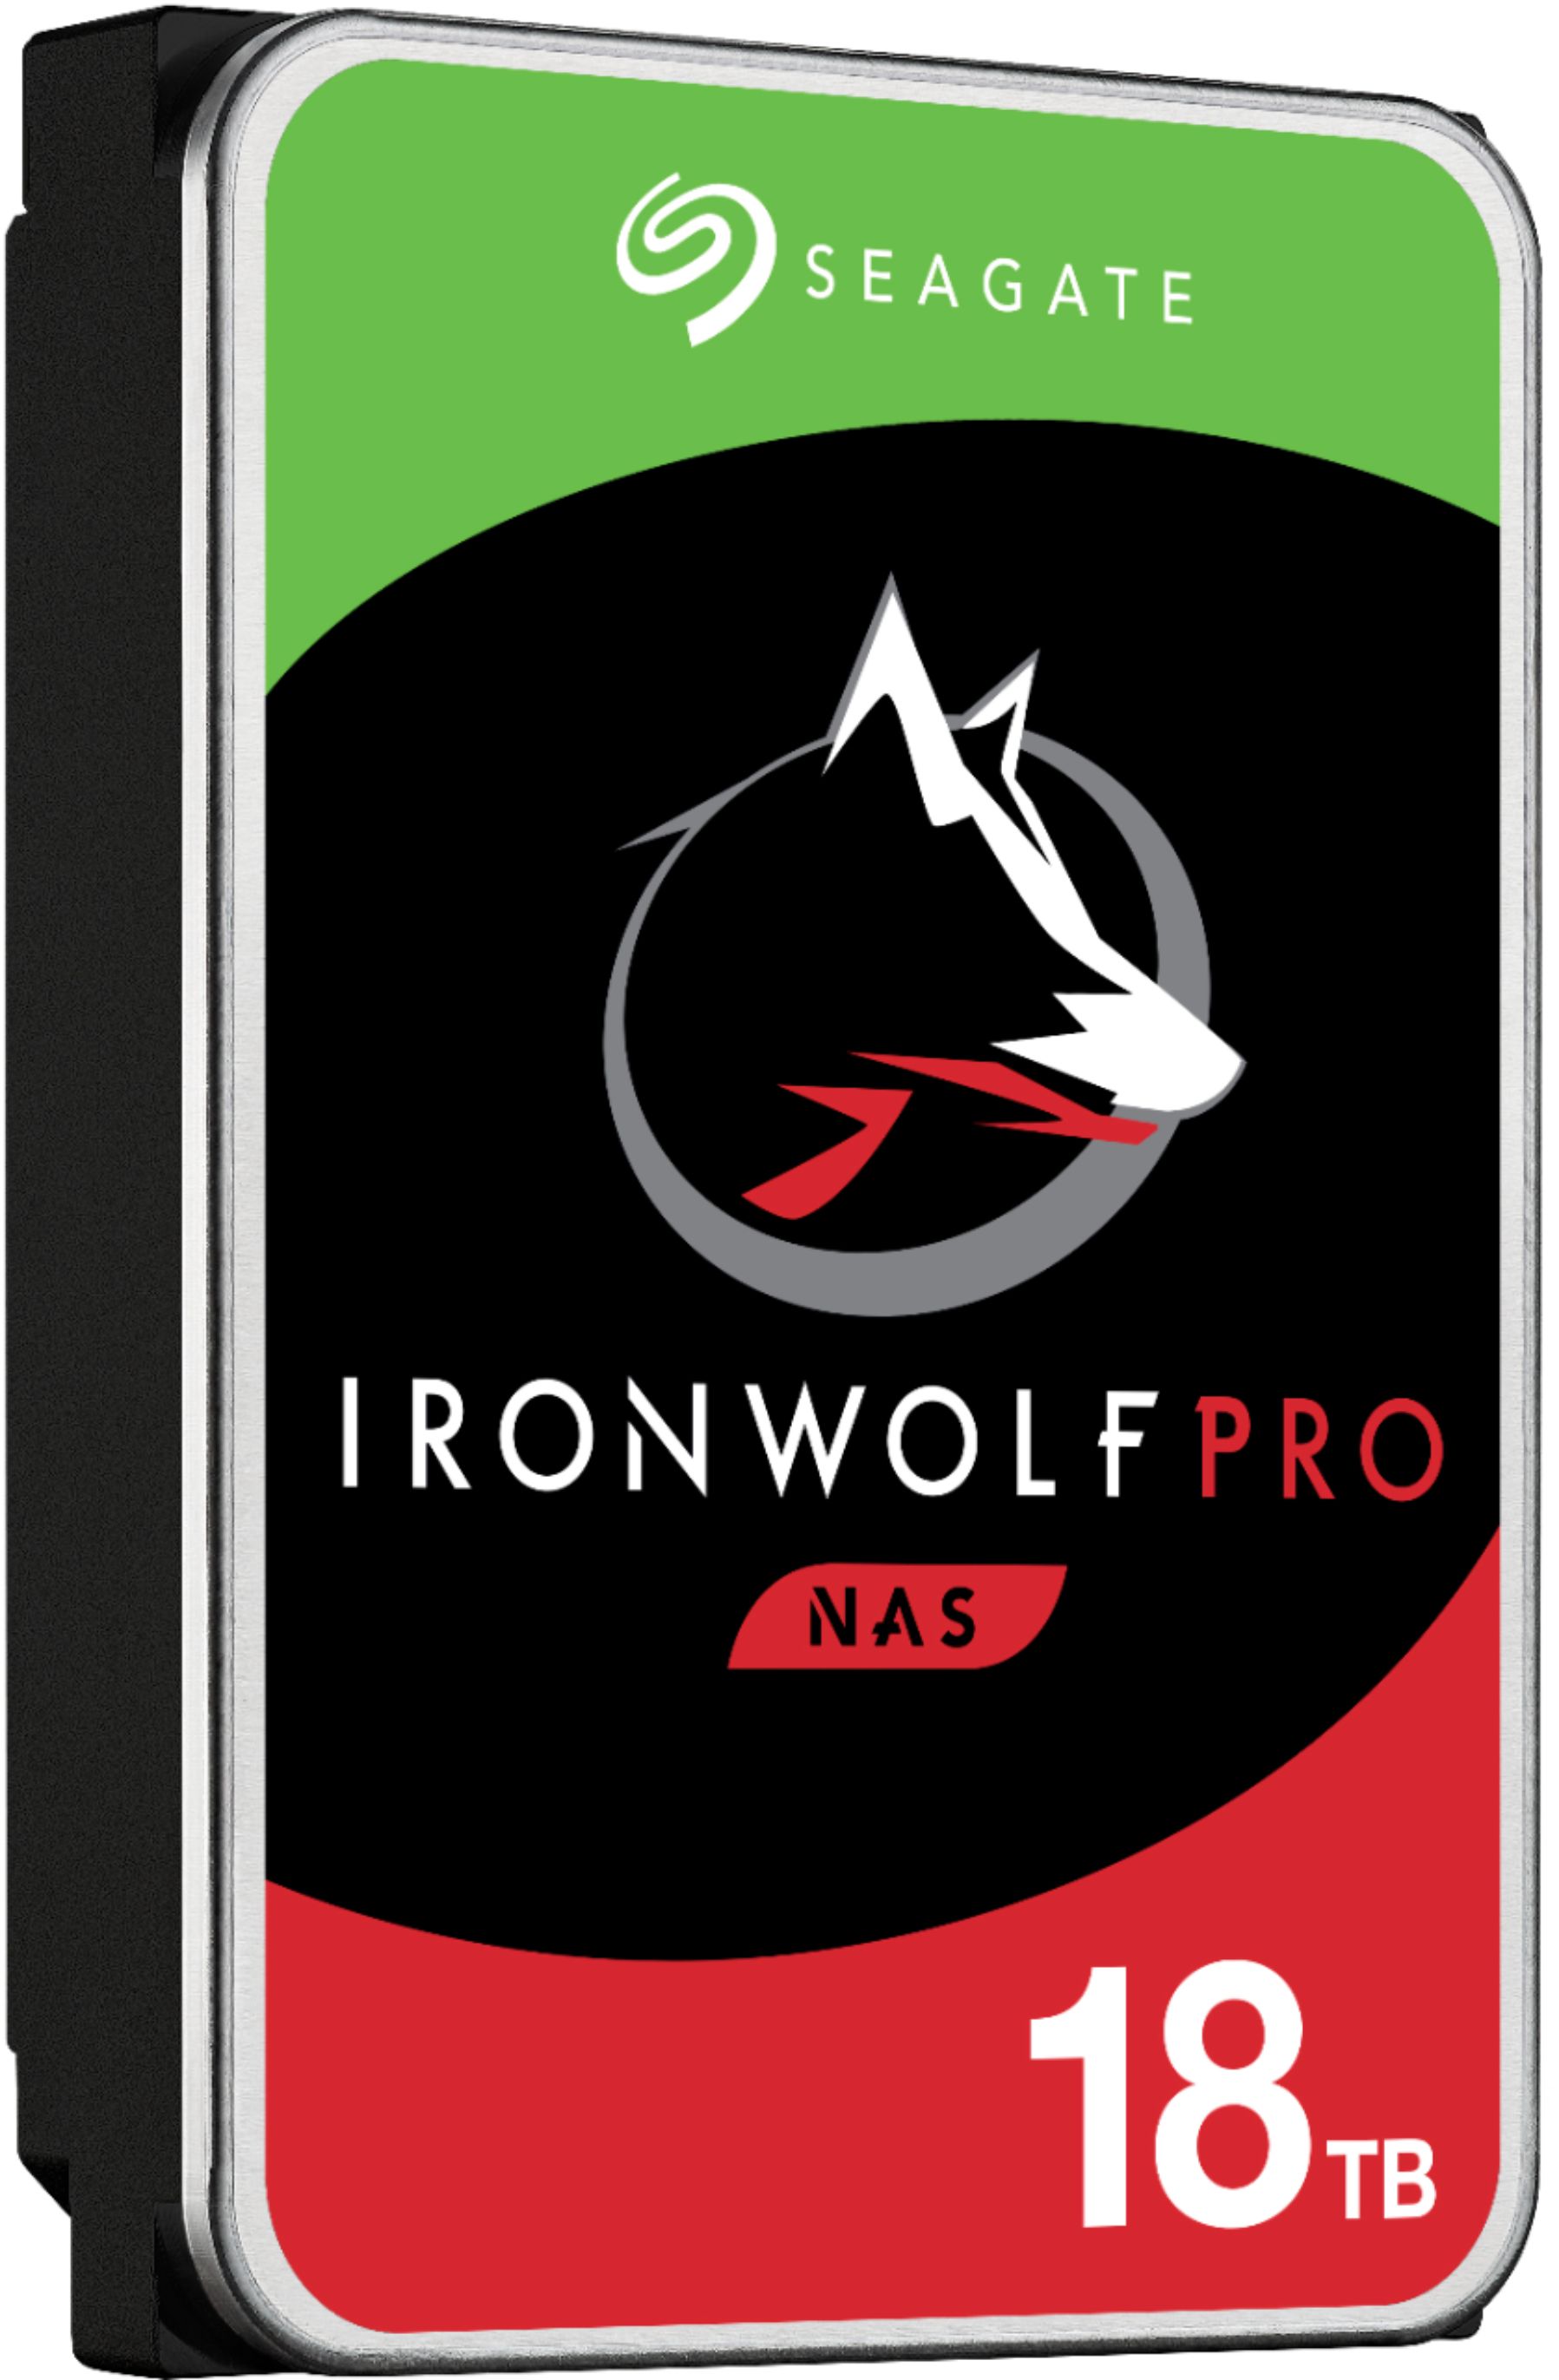 Seagate - IronWolf Pro 18TB Internal SATA NAS Hard Drive with Rescue Data Recovery Services